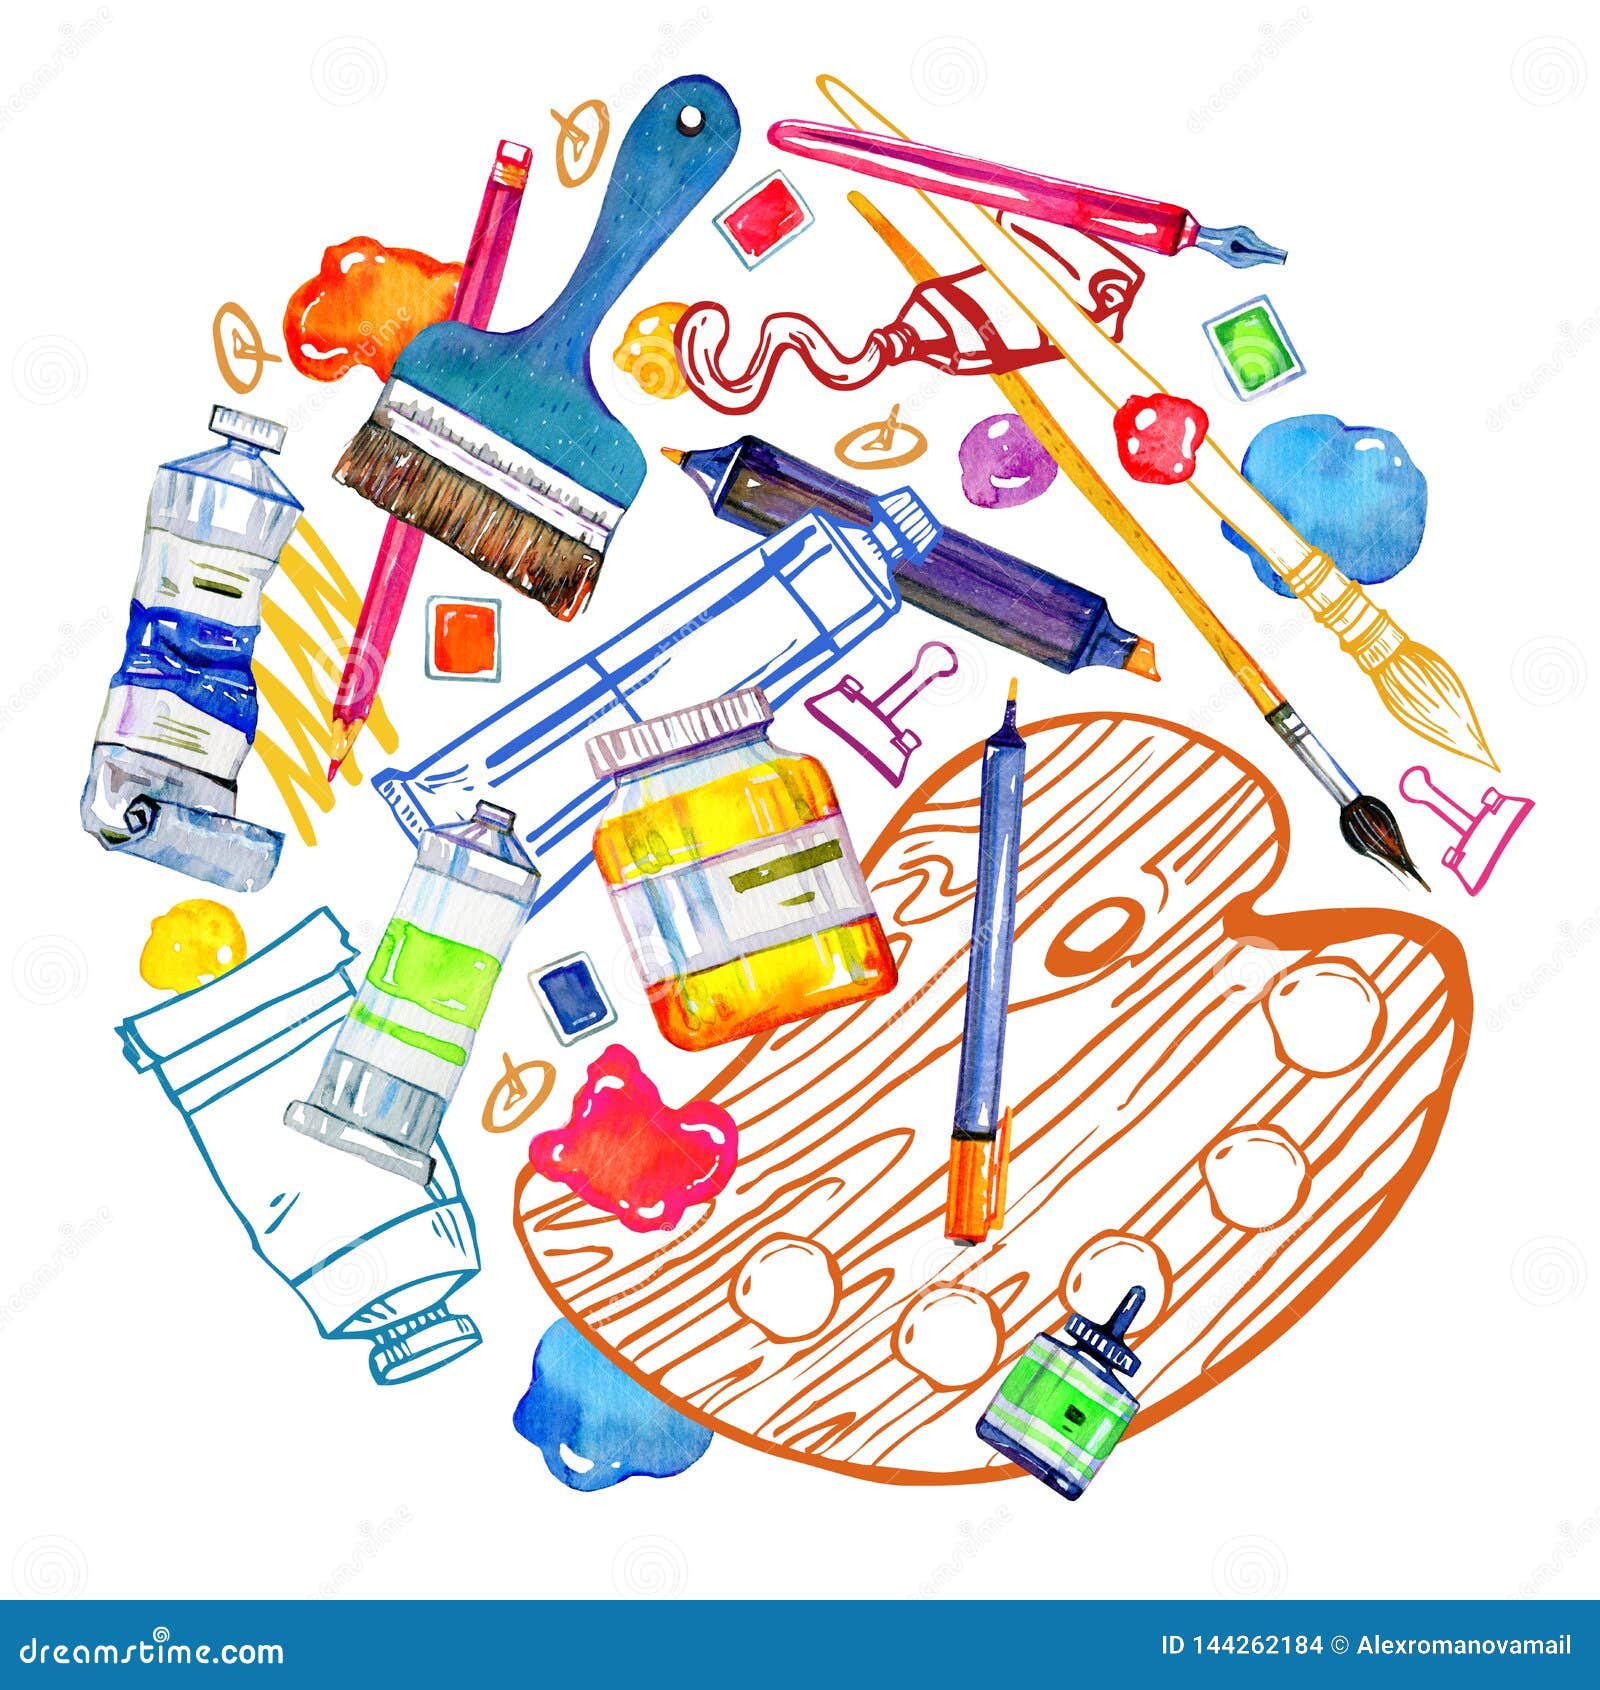 Artist Materials in Round Composition - Palette, Brushes, Pens and ...